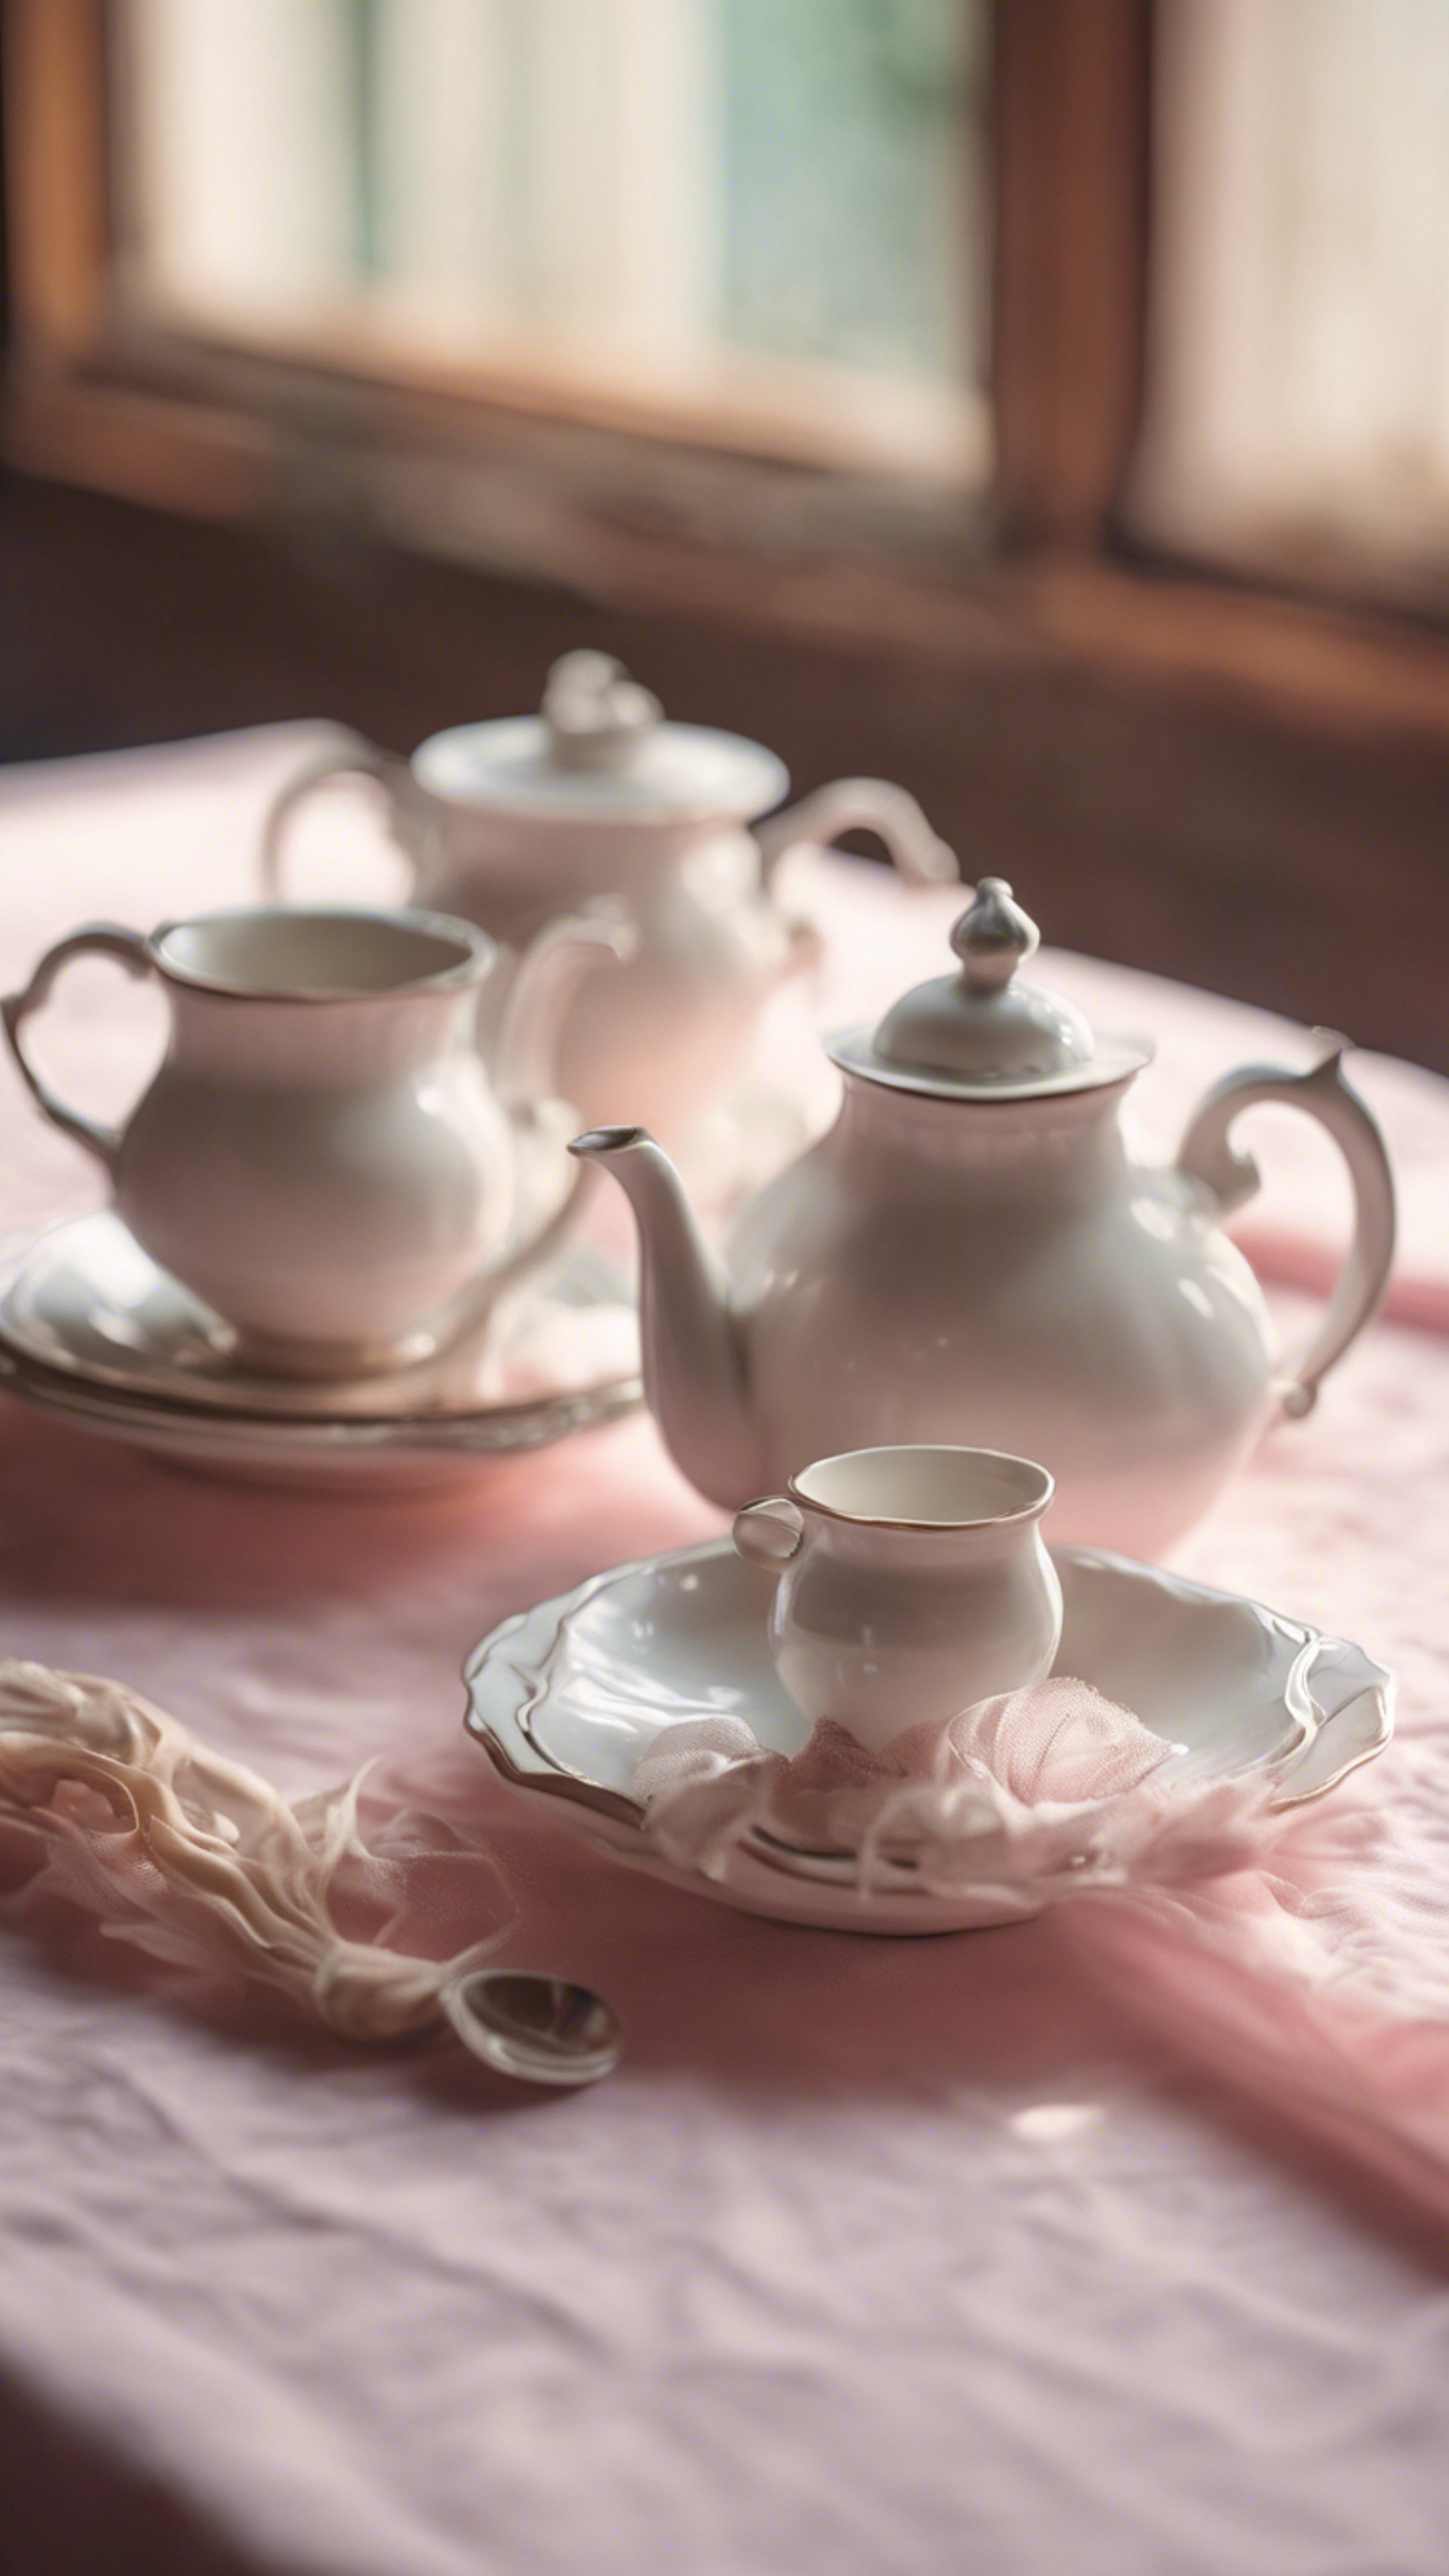 A vintage white tea set, arranged on a fluffy pastel pink tablecloth in a charming, old-world kitchen. ផ្ទាំង​រូបភាព[519305883ddb44018966]